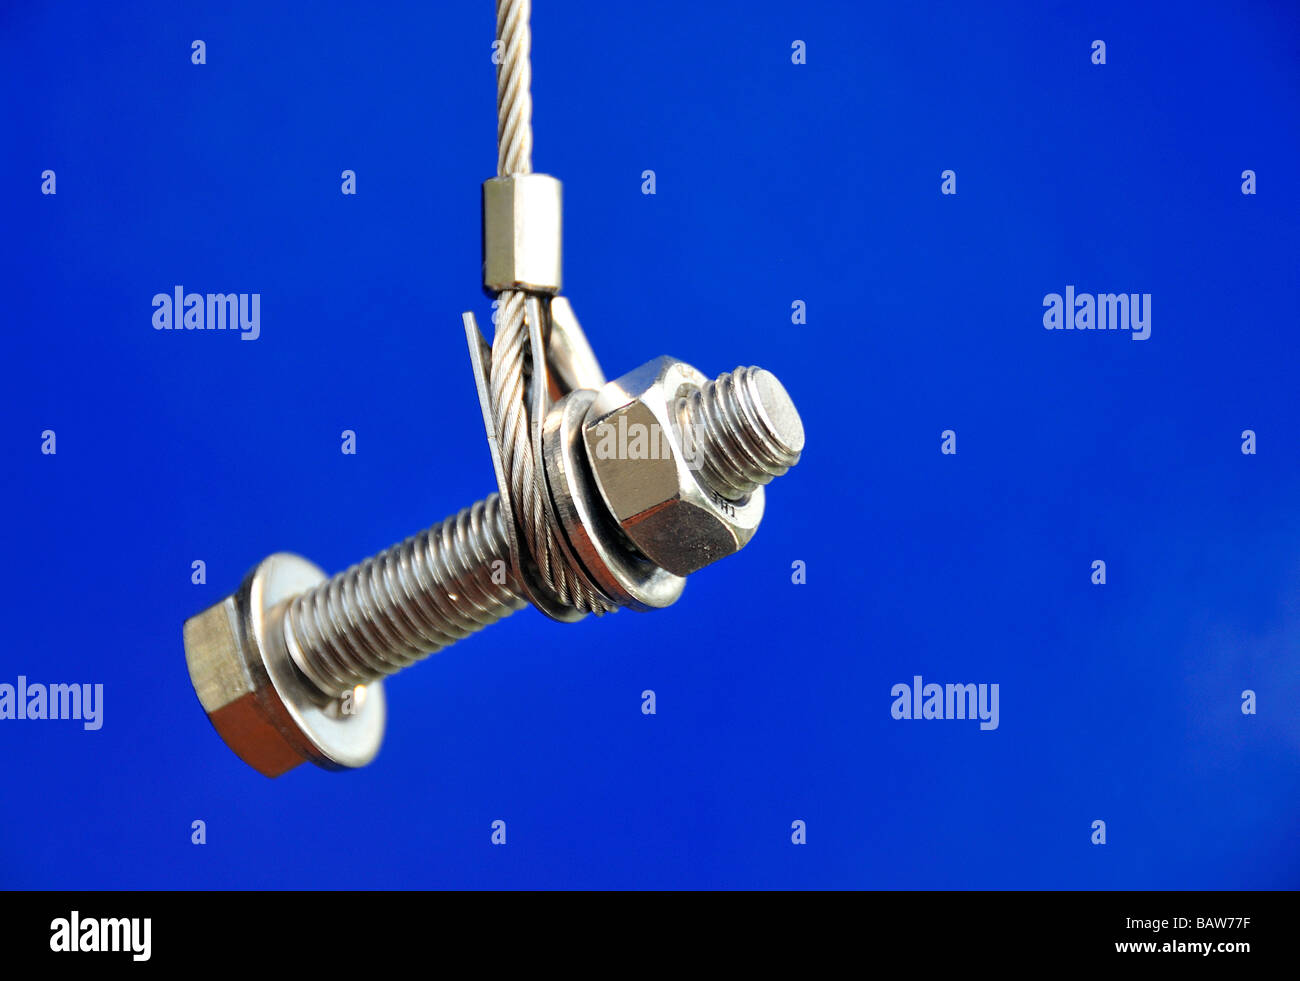 Steel bolt on a blue background Stock Photo